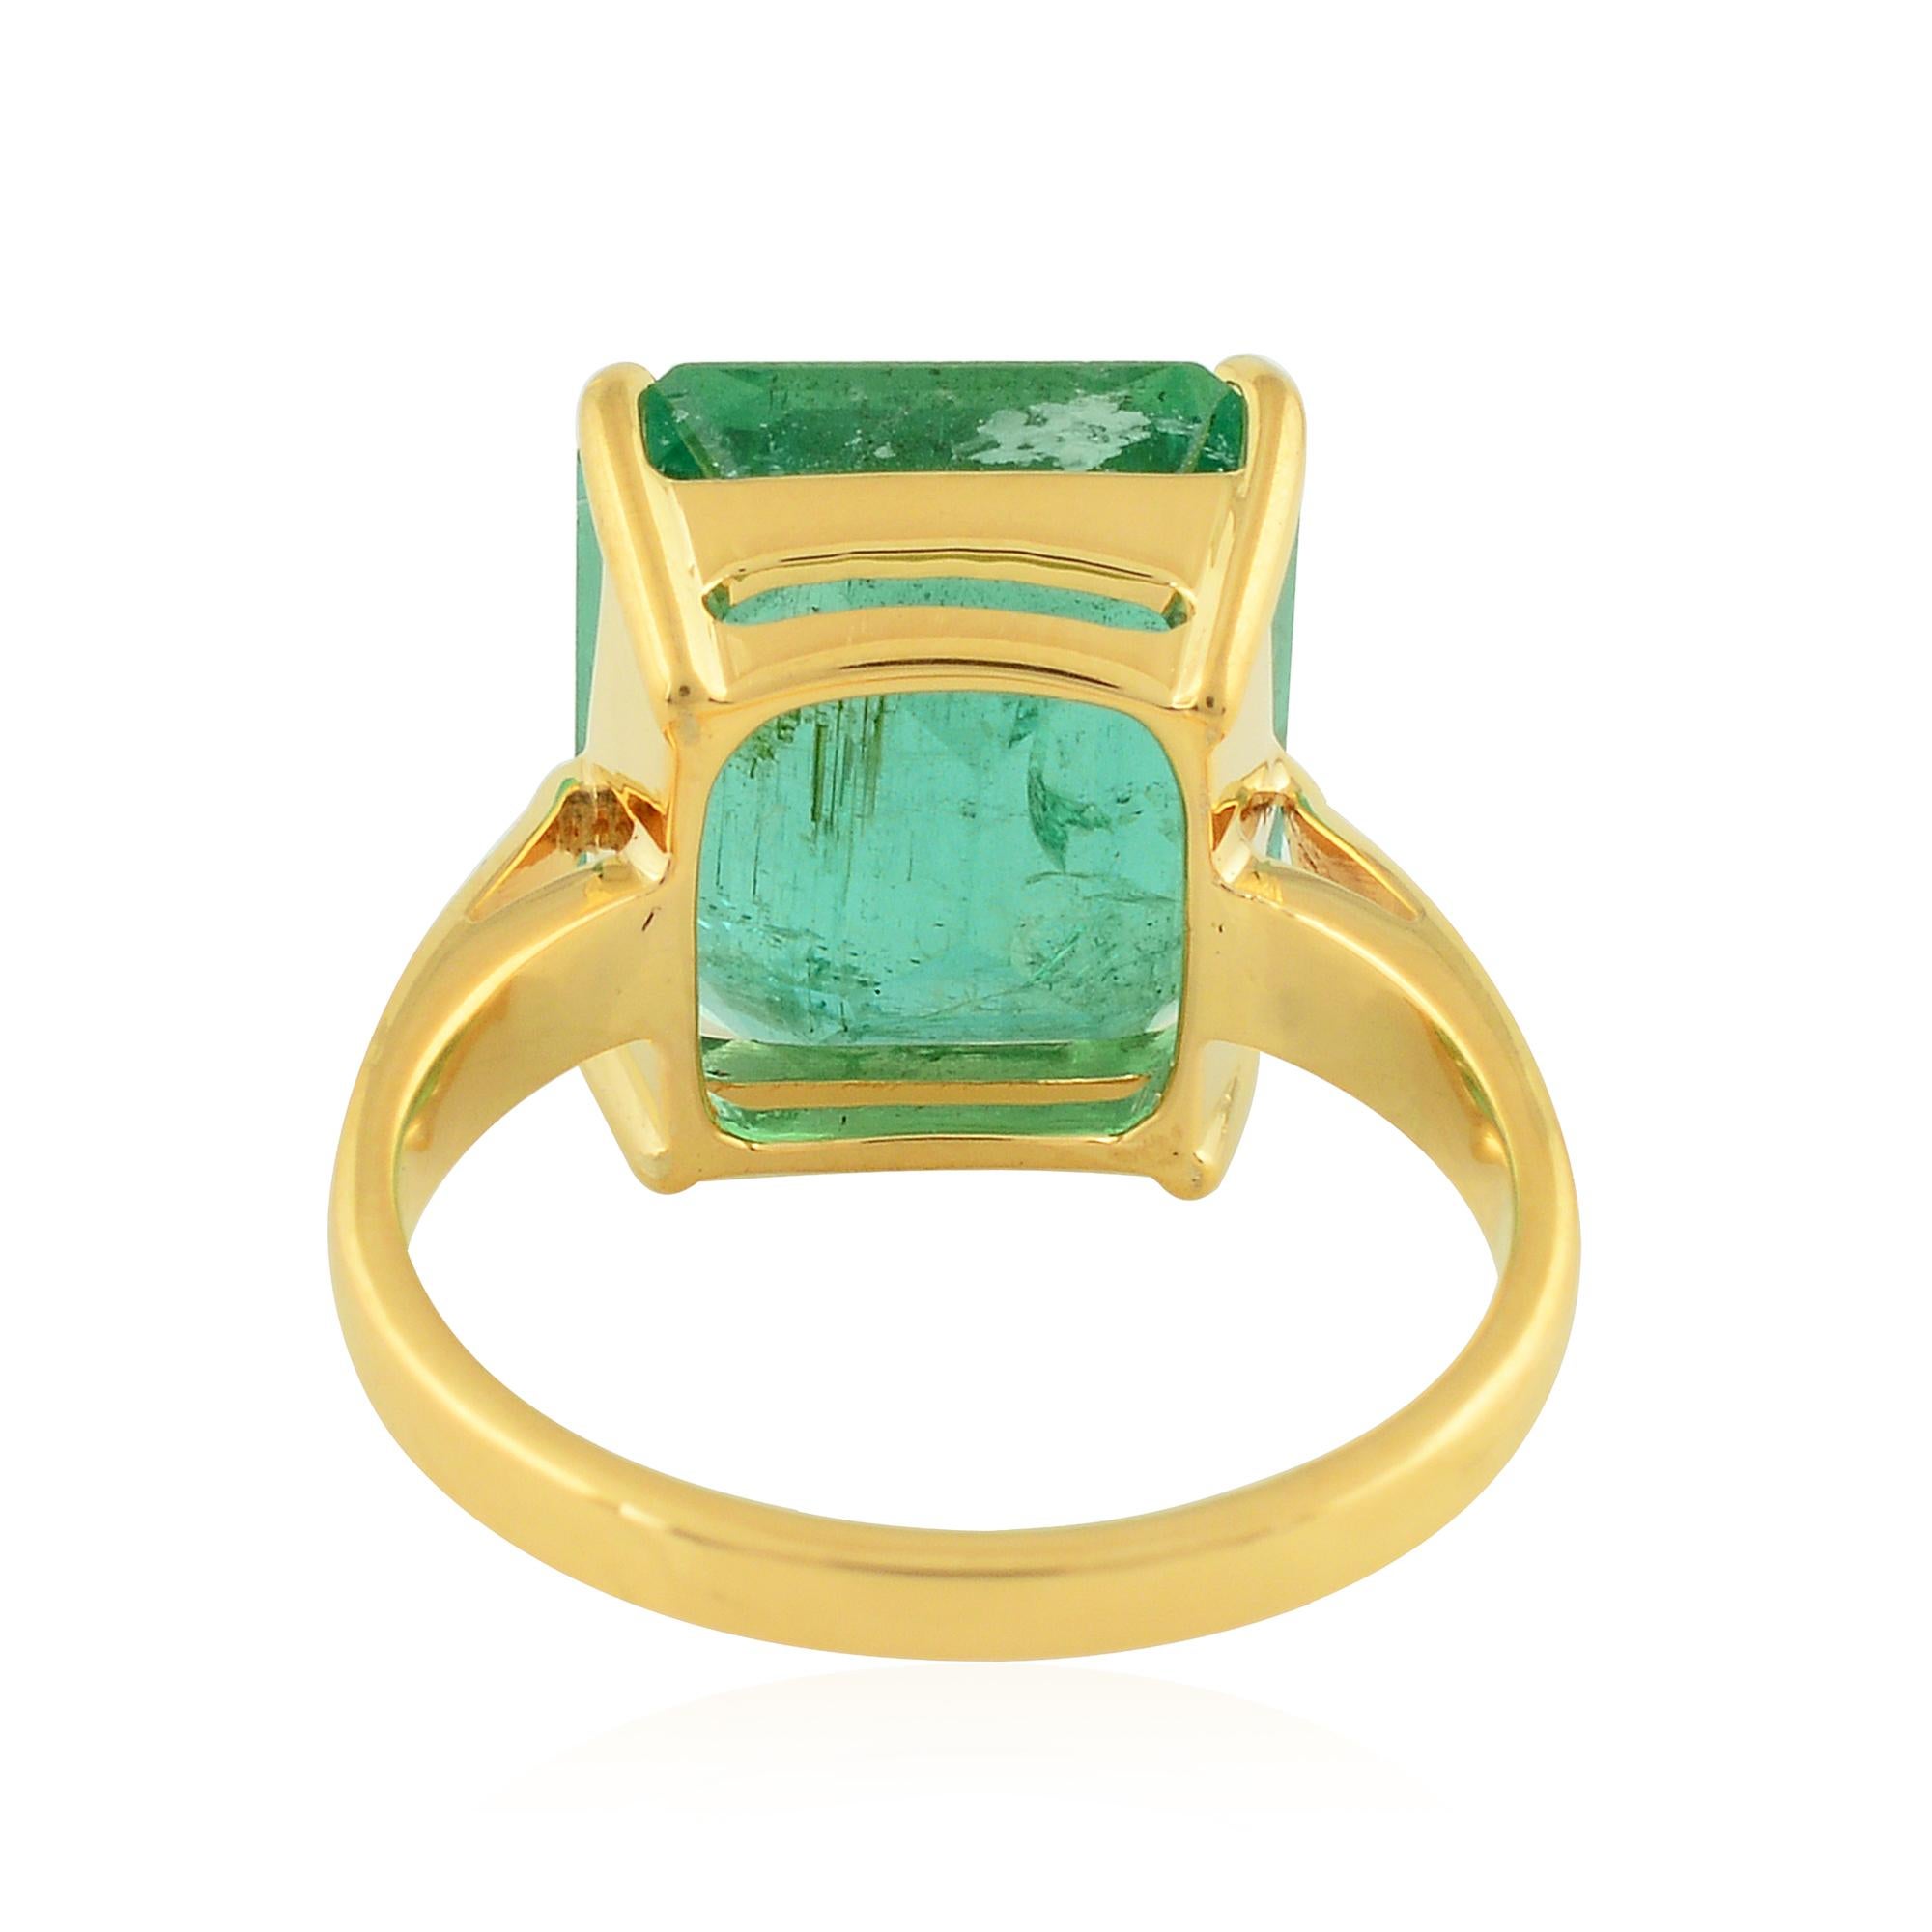 Immerse yourself in the captivating allure of this Natural 5.84 Carat Solitaire Zambian Emerald Gemstone Ring, meticulously set in radiant 18 Karat Yellow Gold. This exquisite piece of fine jewelry is a celebration of elegance and luxury, destined